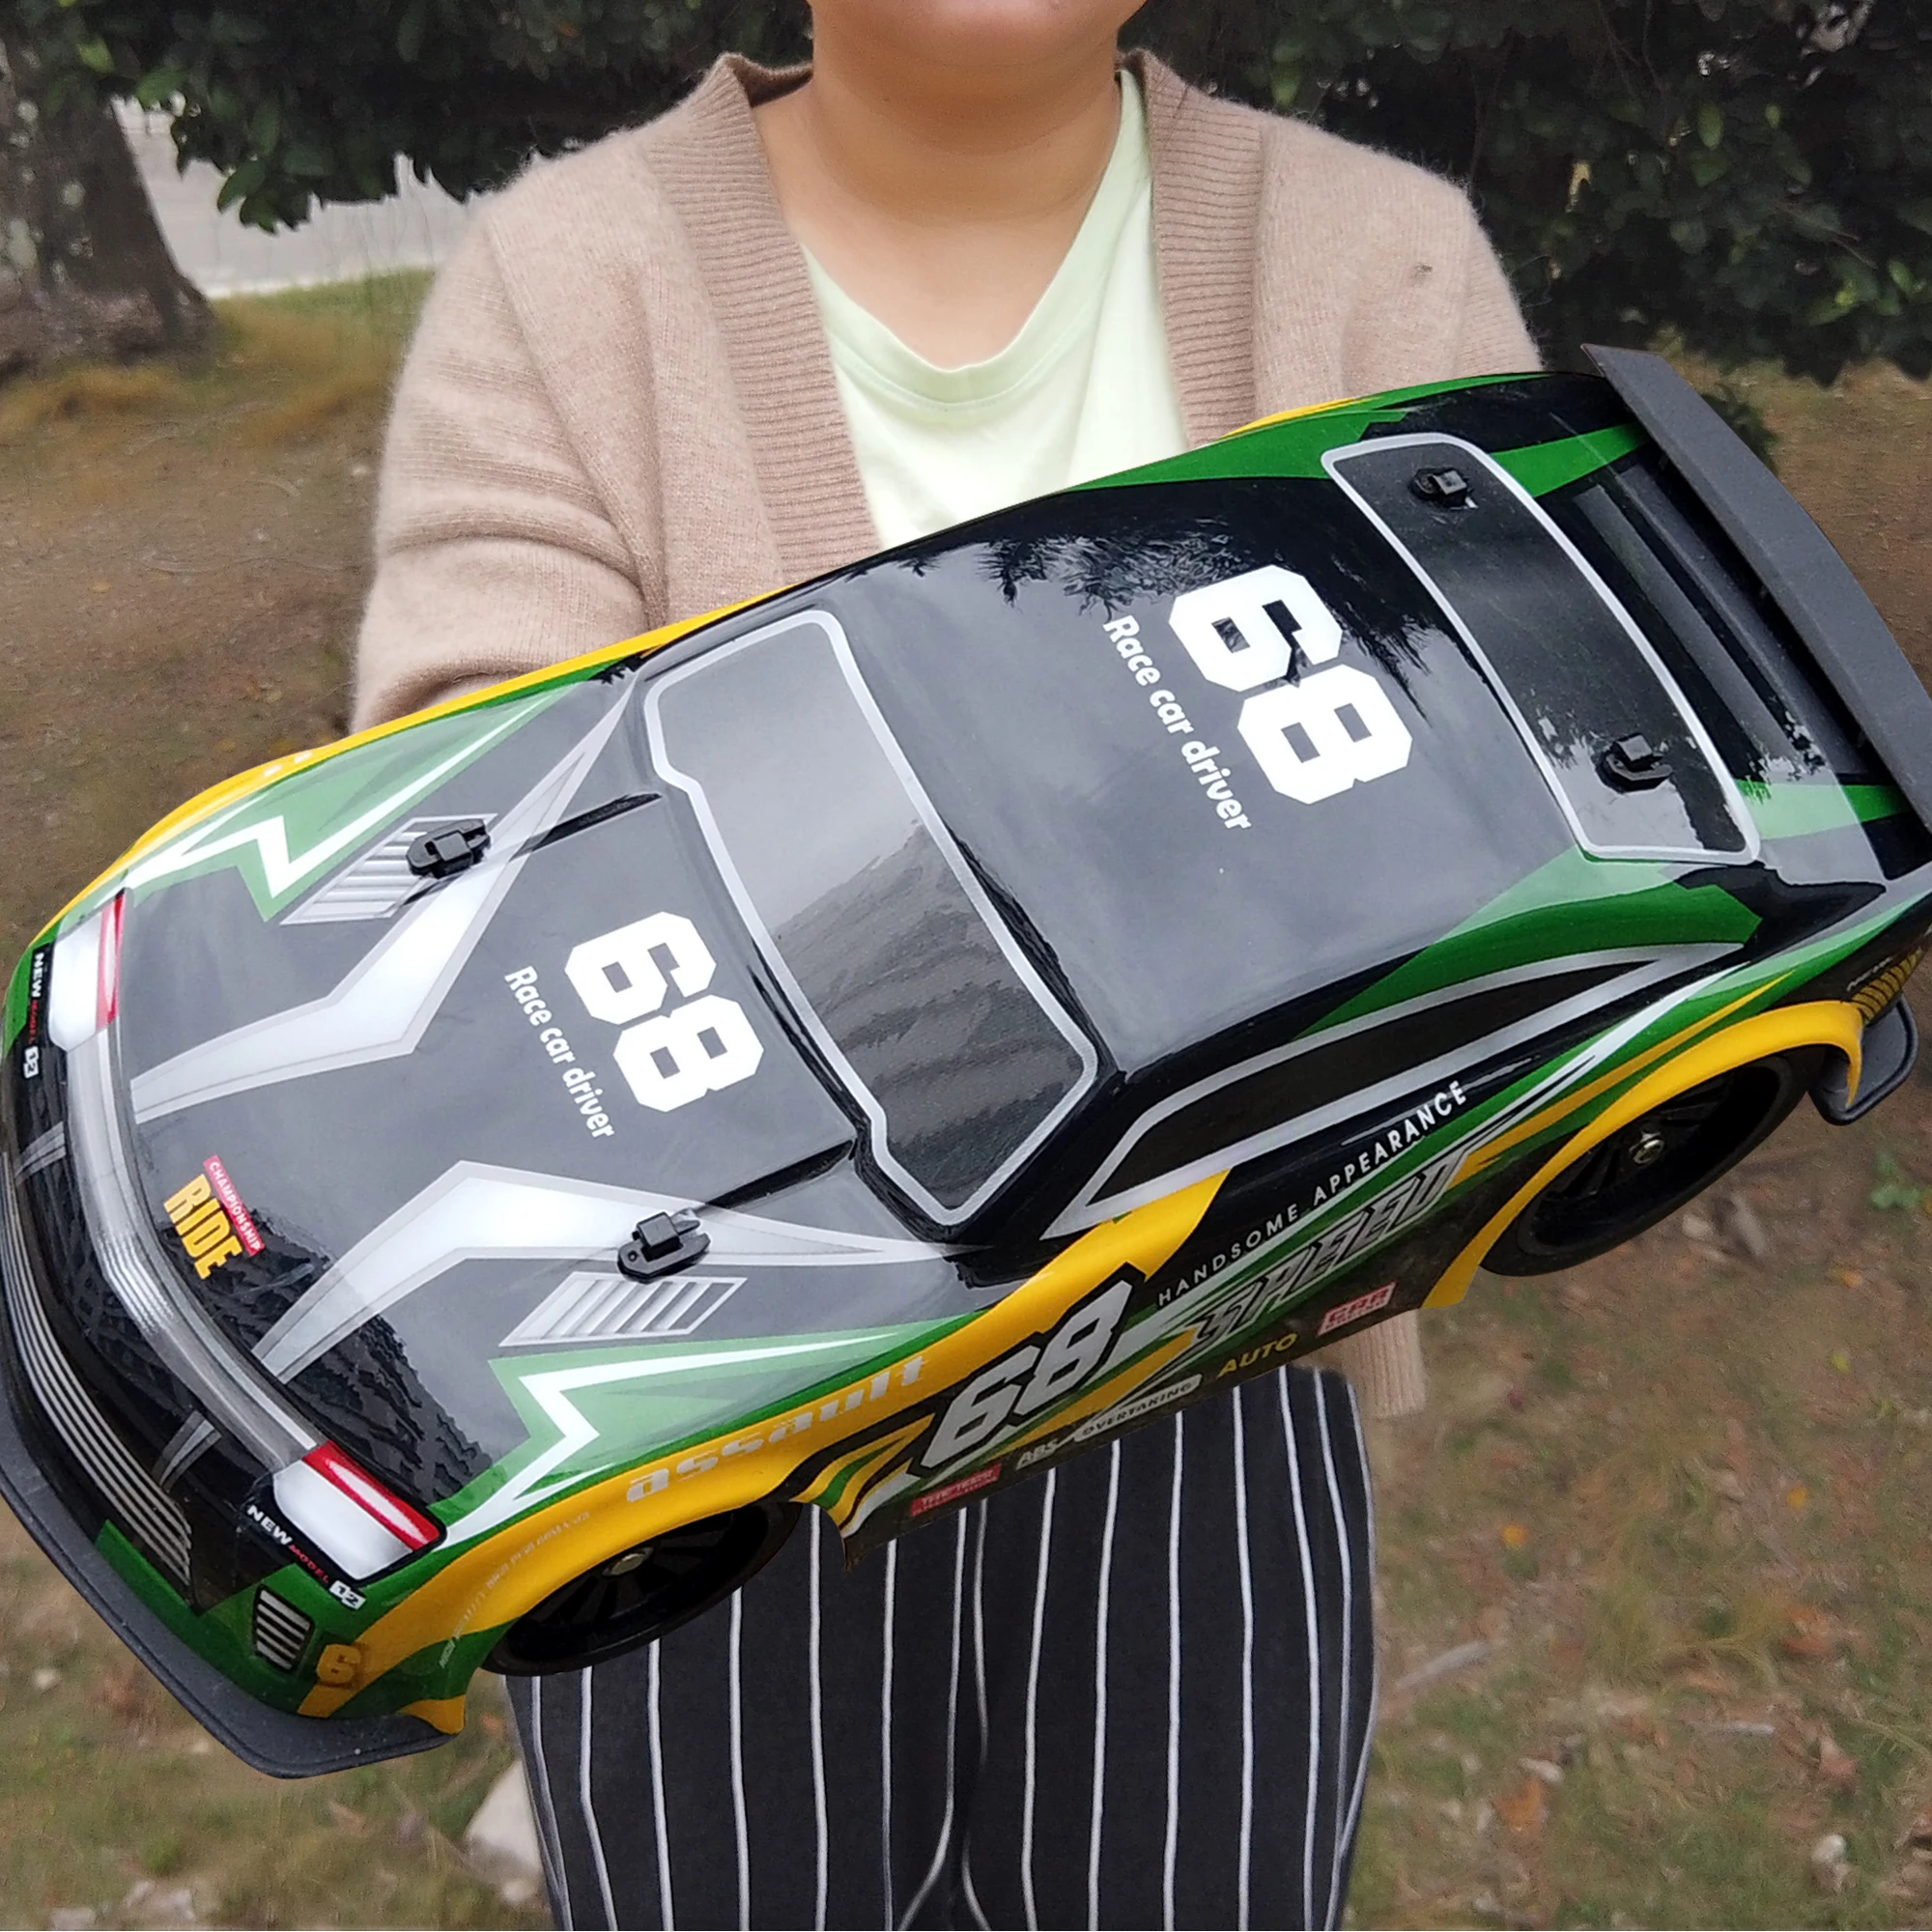 Drifting Stunt Toy Gtr Cars Manufacturer Racing Electric Remote Control  Cheap Track Car. Hobby Hand Toys Under 600 Rc Drift Car - Buy Mini 1/10 Mst  Rmx Drifting Stunt Toy Gtr Cars